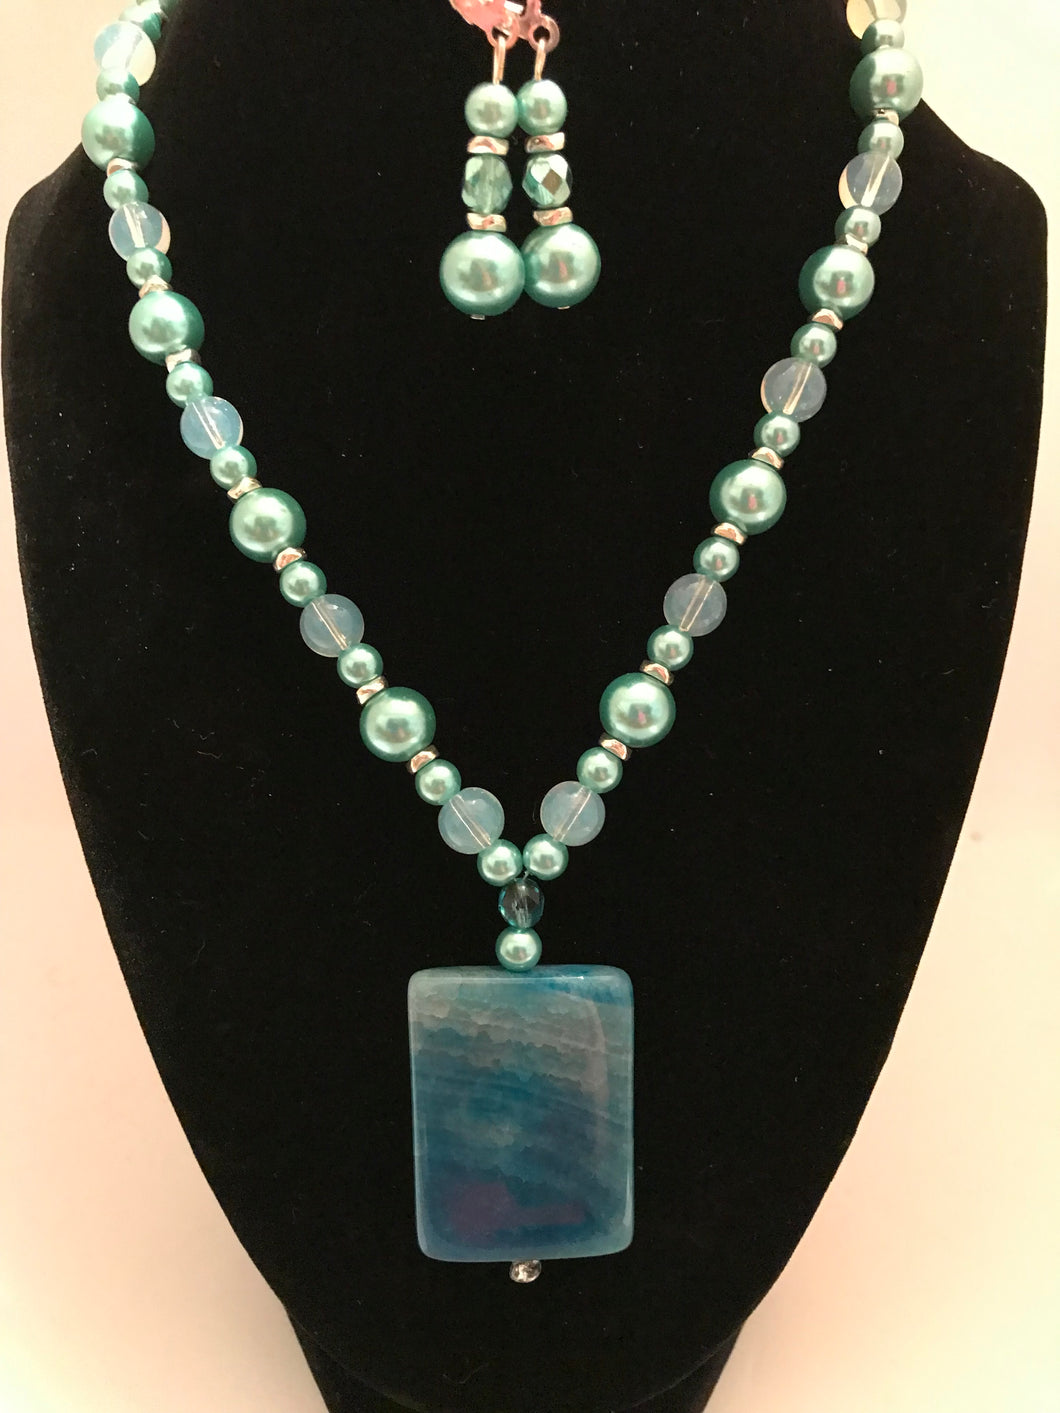 Novelty rectangular ocean blue pendant with soft blue pearl beads, and matching earrings